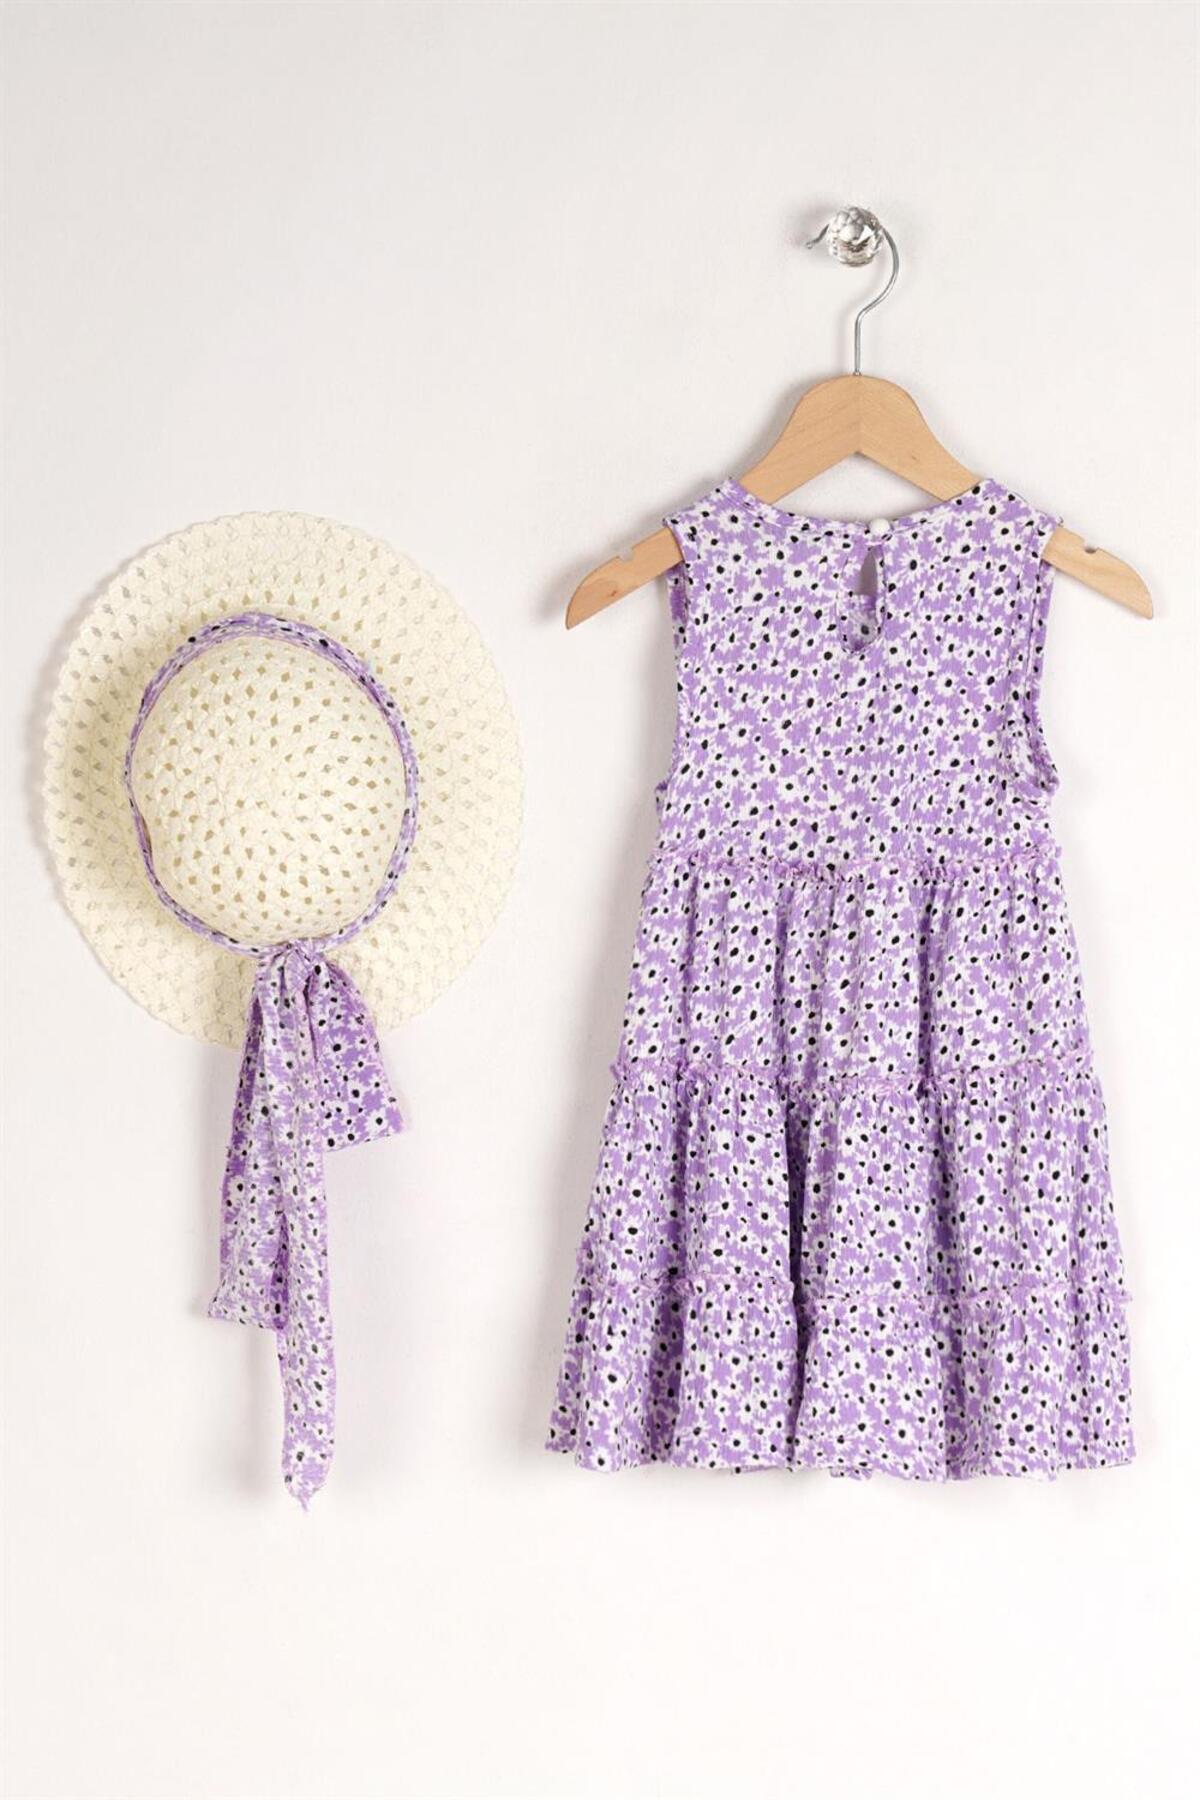 Girl Child Lilac Colored Floral Patterned Dress With Hat Accessory